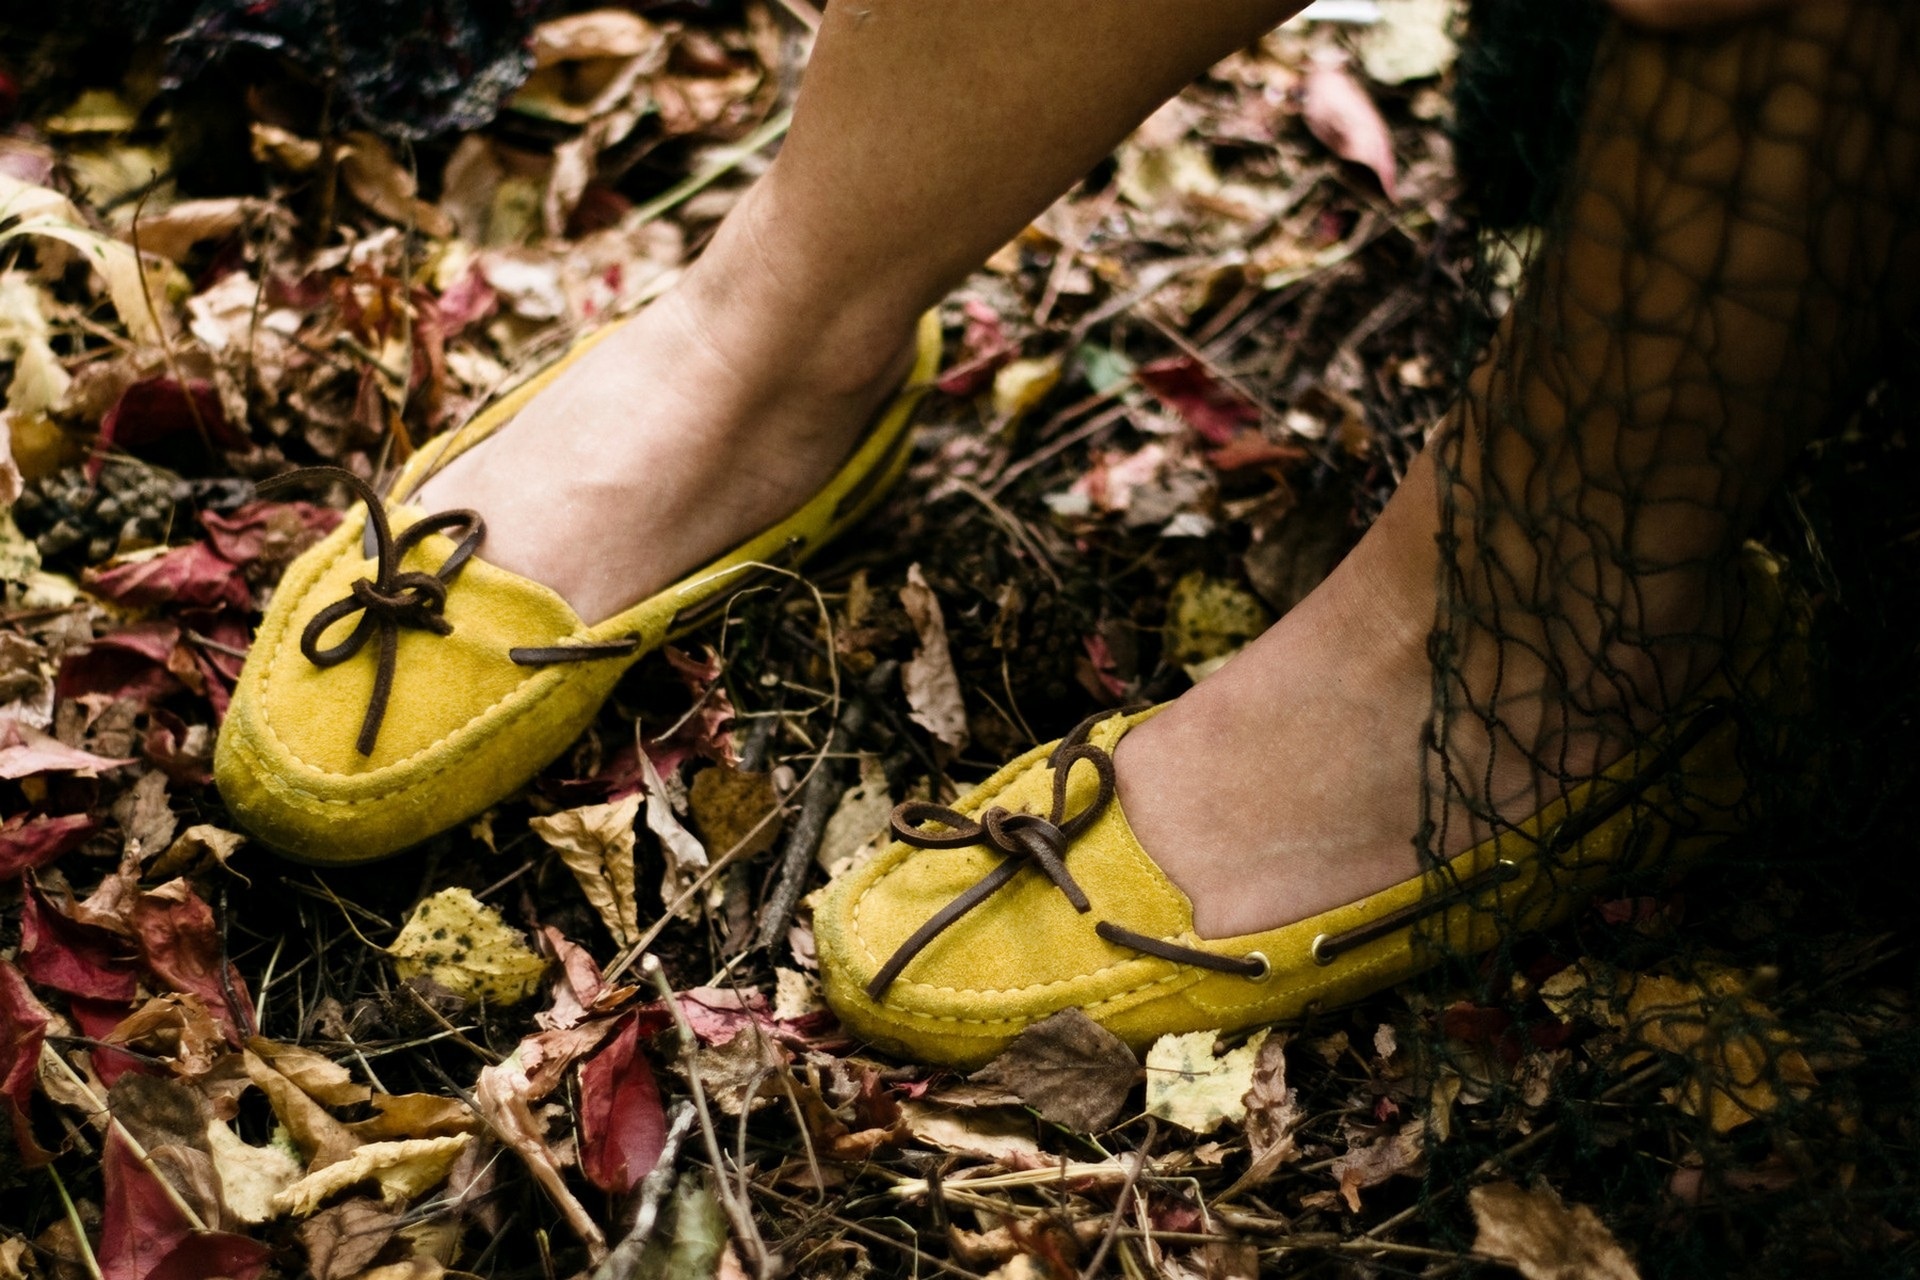 person wearing yellow suede boat shoes